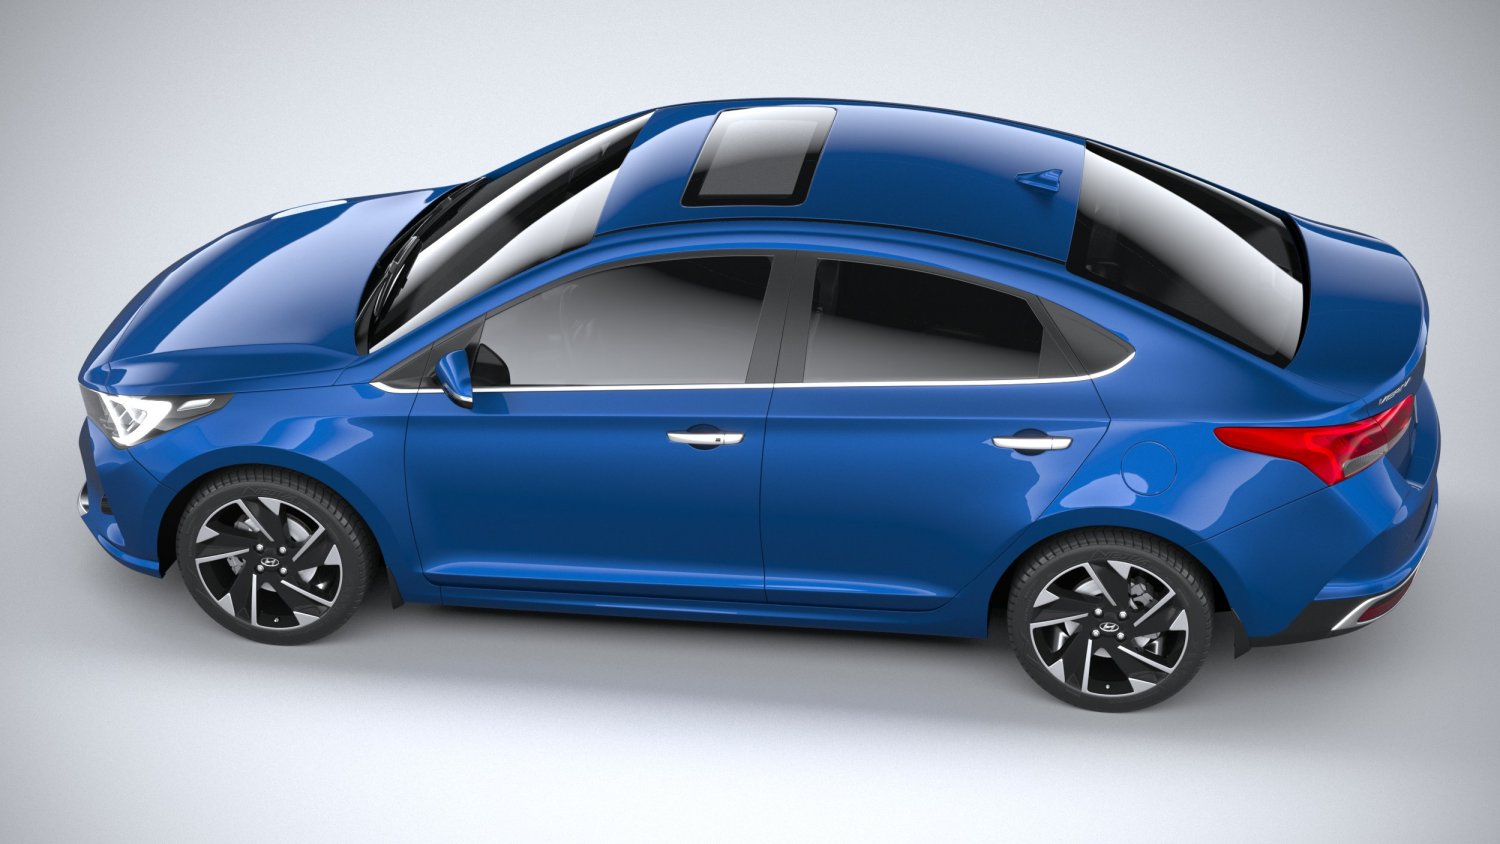 2020 Hyundai Accent Reviews, Insights, and Specs